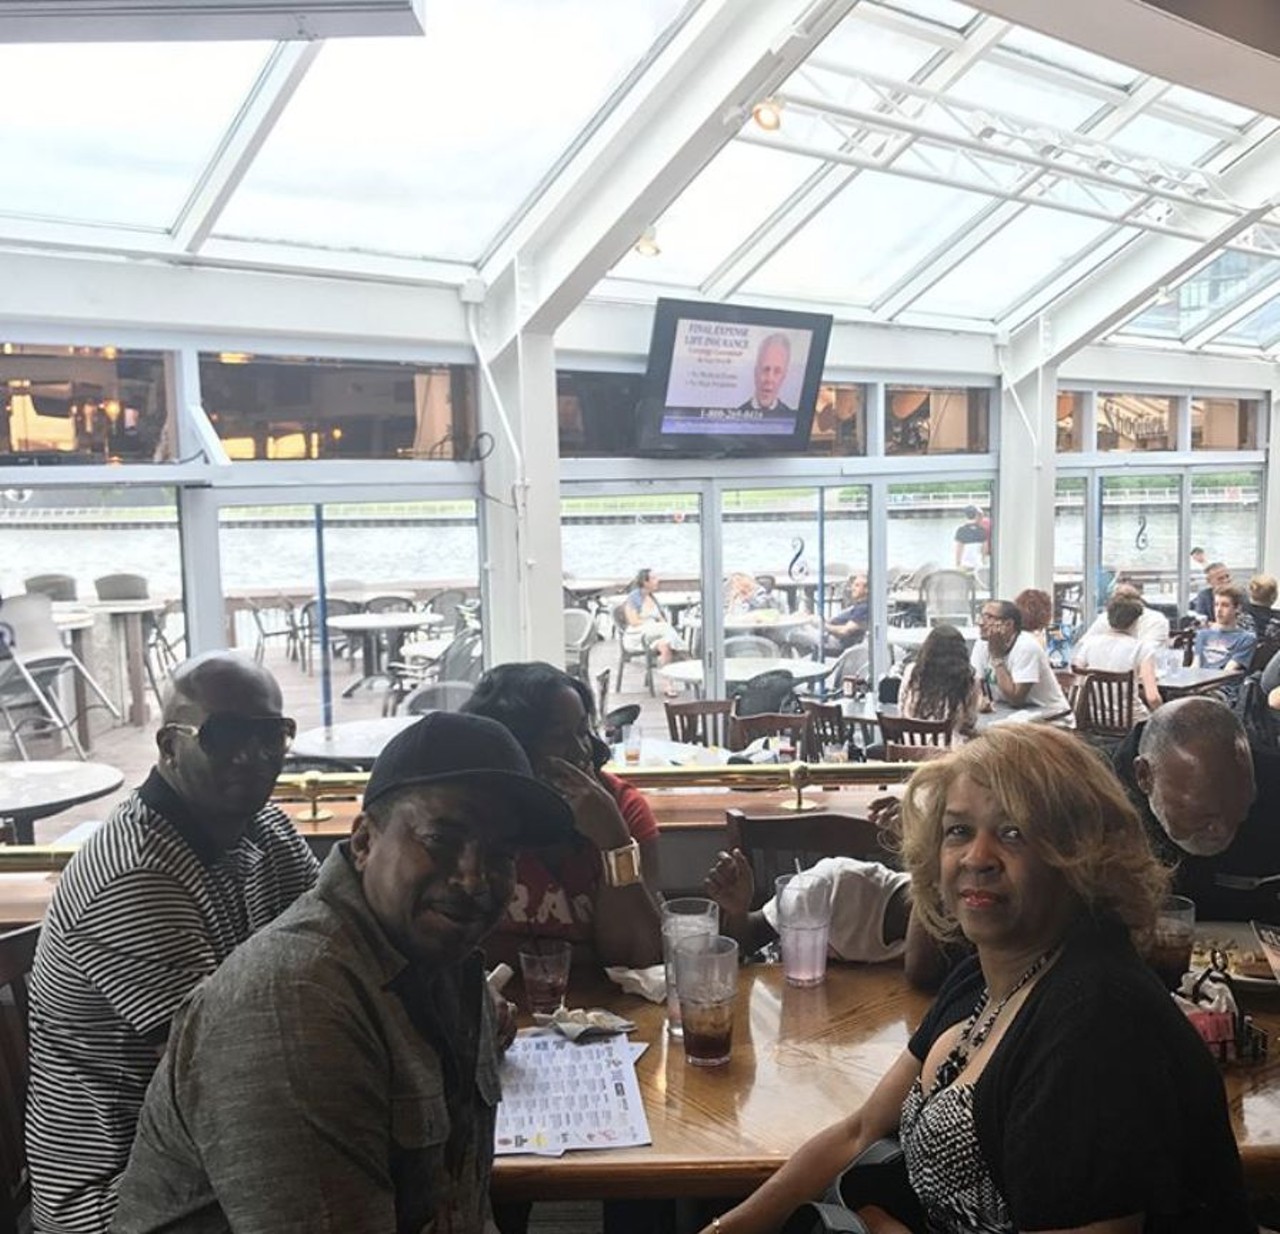 Shooters on the Water
1148 Main Ave., Cleveland
Opened in 1987, Shooters on the Water has been serving its guests a taste of coastal life with its views of the Cuyahoga River for decades.
Photo via lovely_meka/Instagram